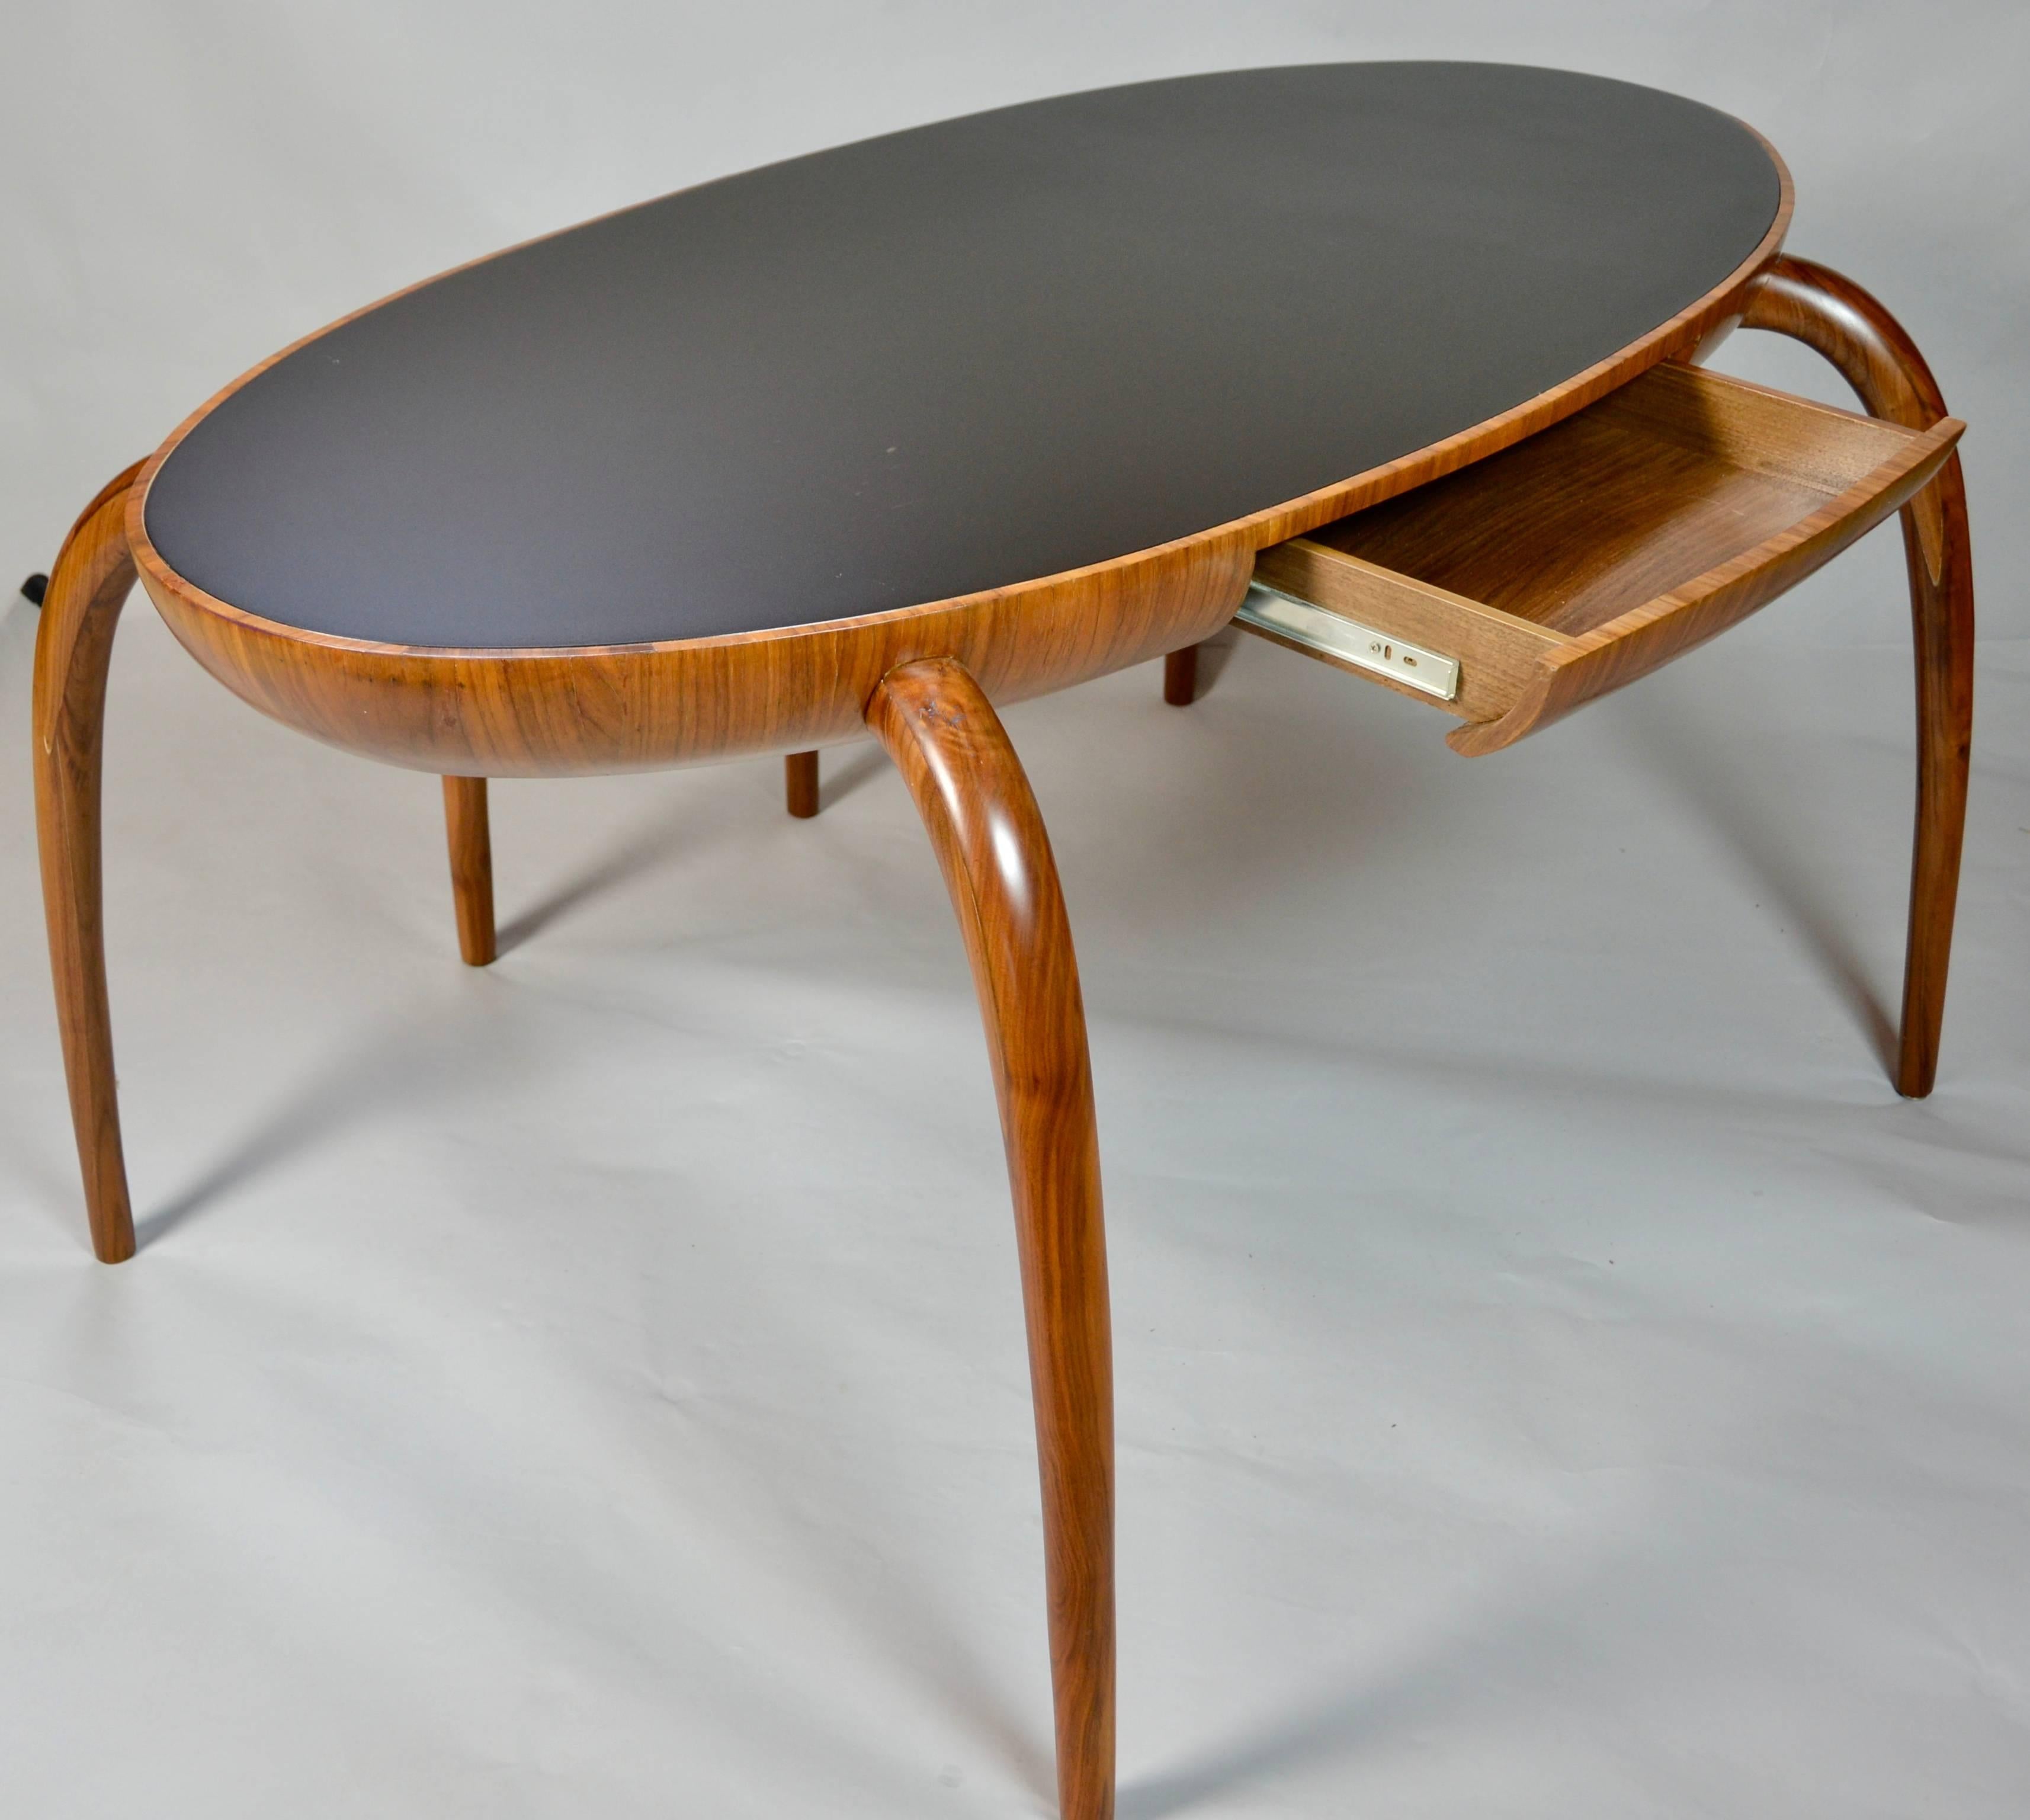 Unusual spider legged oval top writing desk with a single inset drawer. 
Handcrafted and laminated in a walnut veneer with hand shaped removable legs and an inset black glass top.
The desk is in excellent condition.